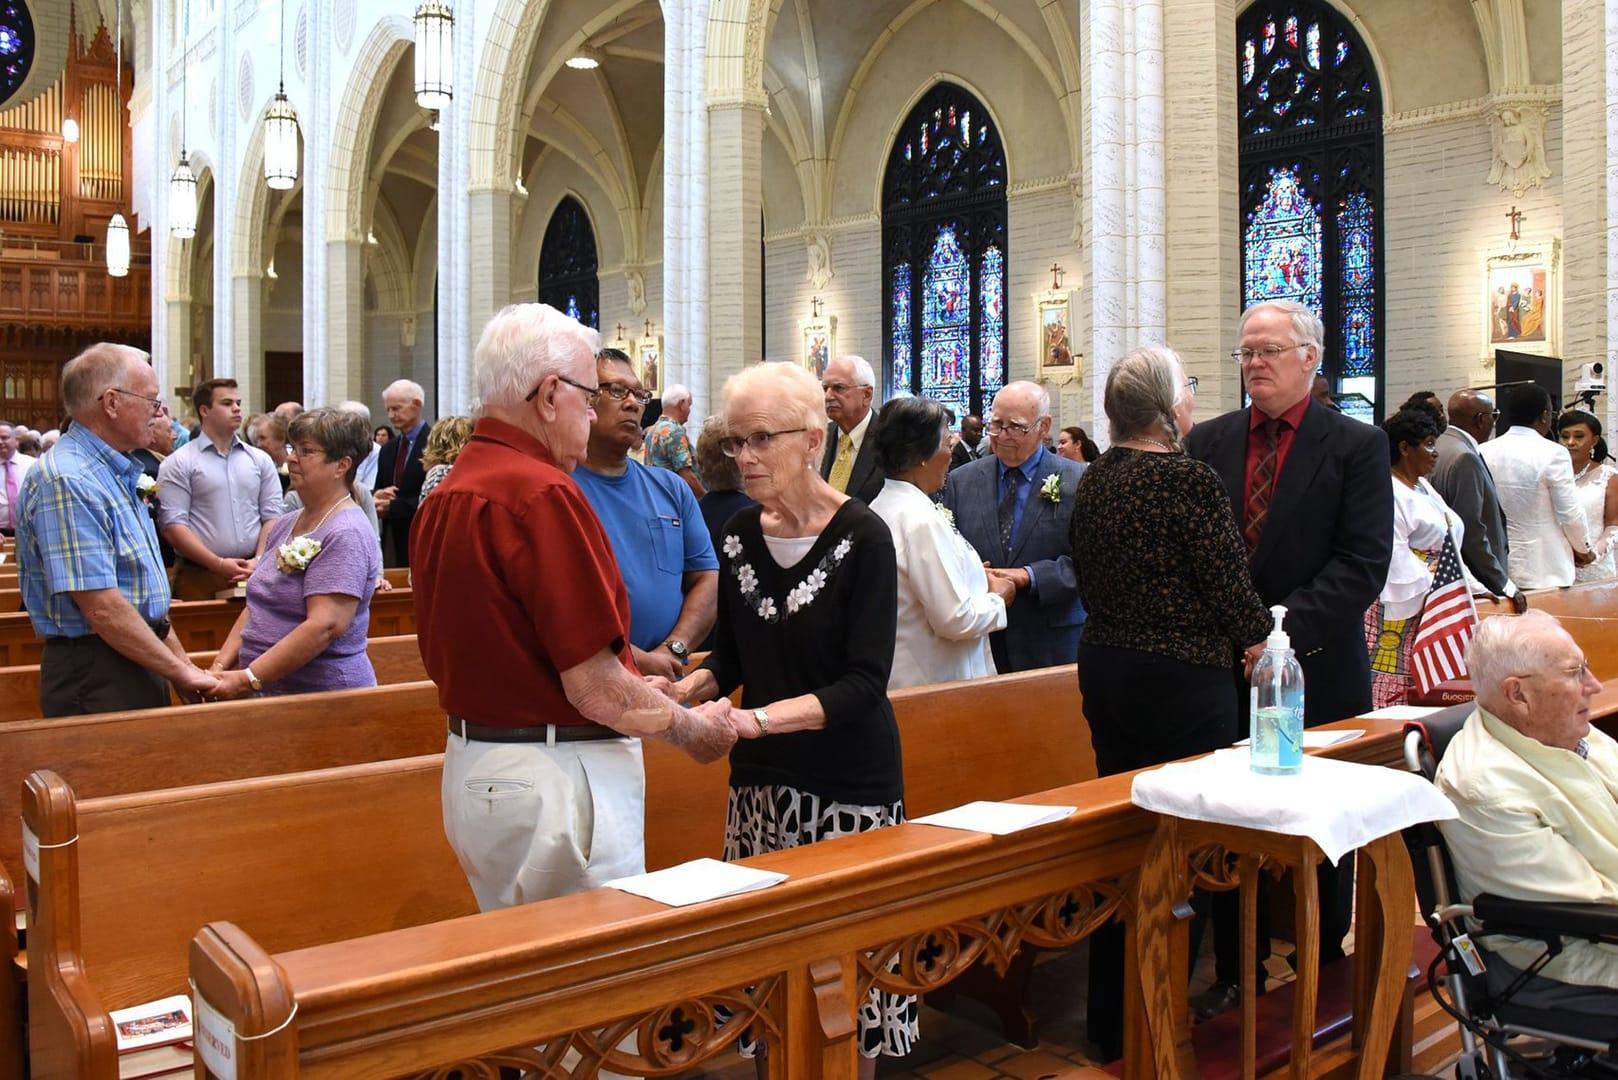 Long-married couples at annual Mass celebrate years together, strong faith